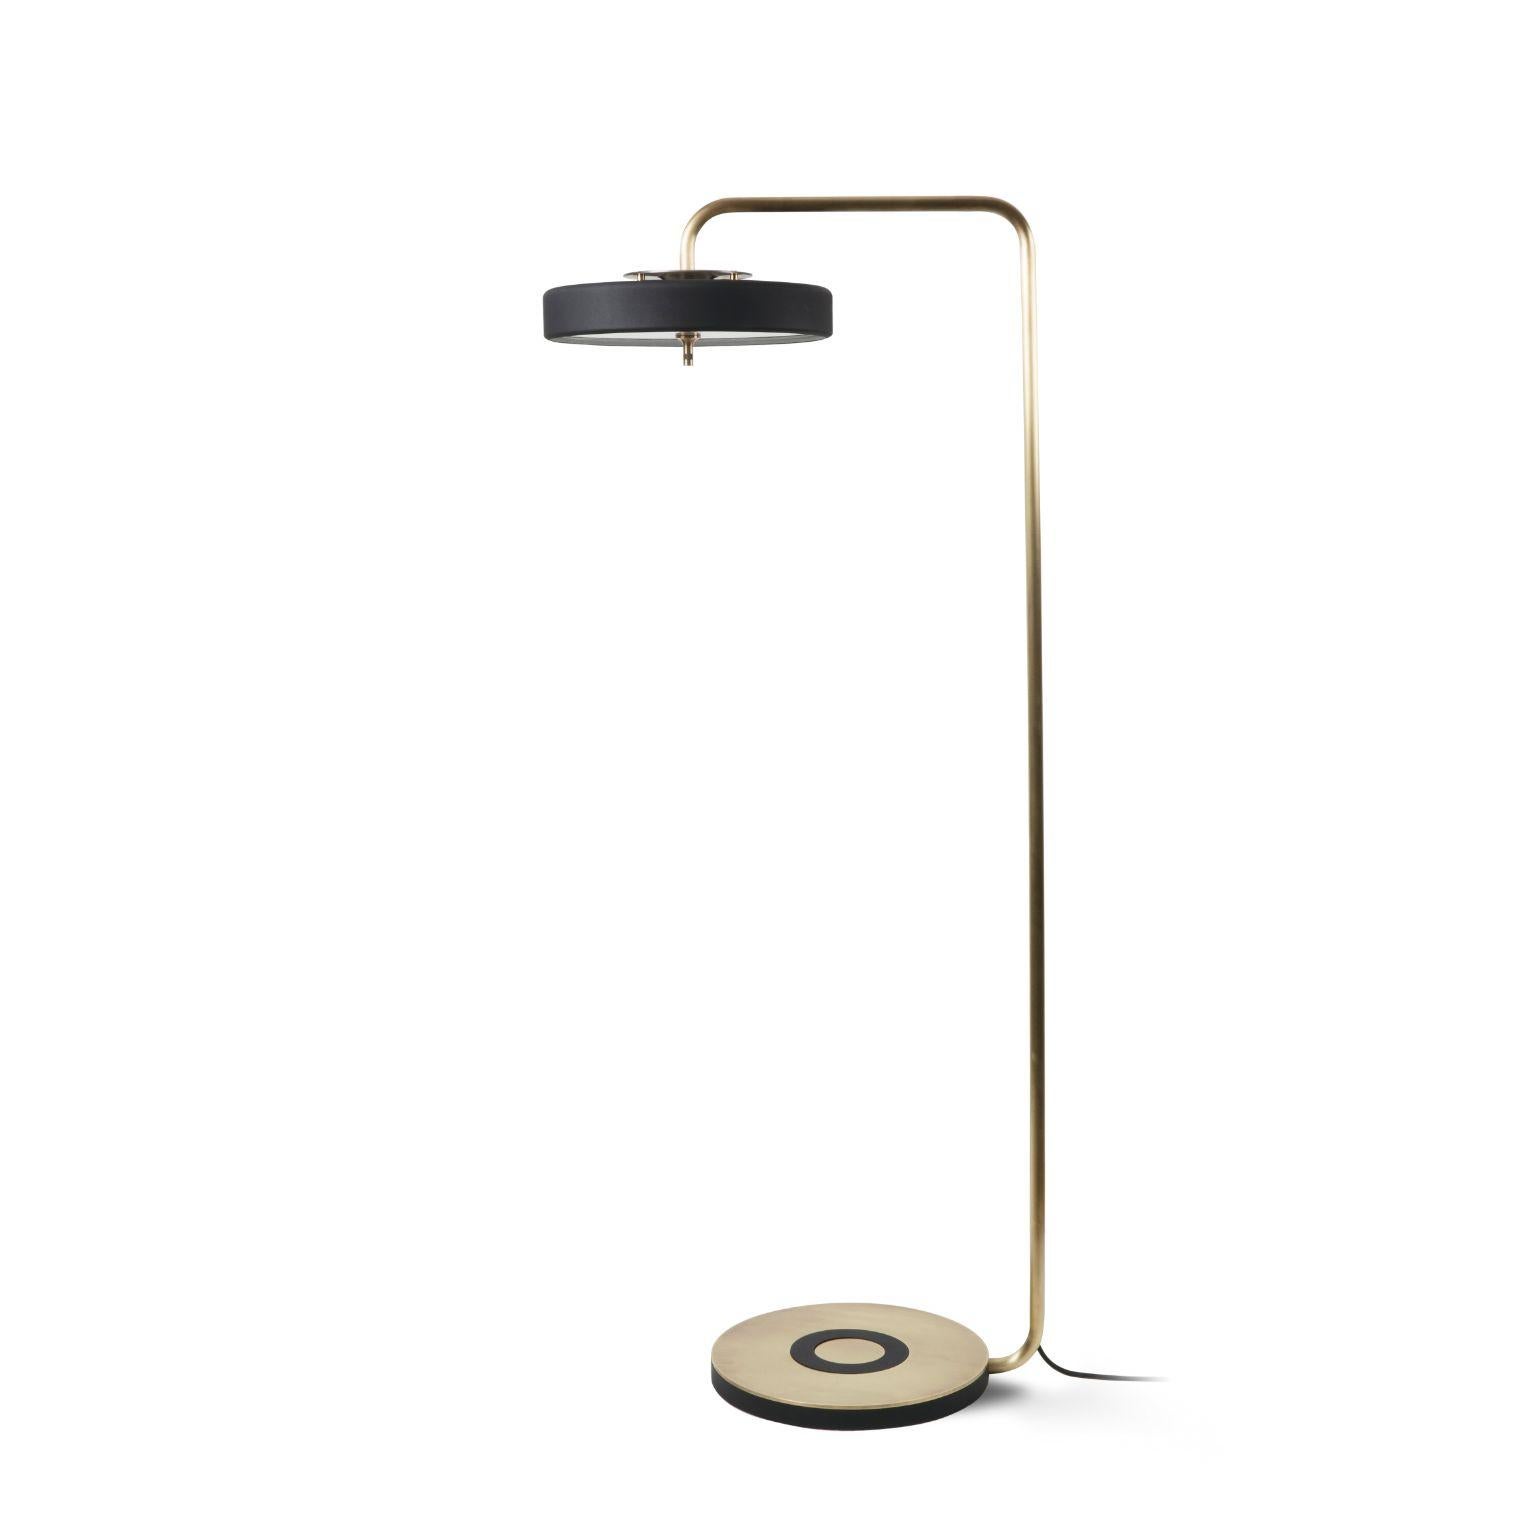 Revolve floor lamp - polished brass - black by Bert Frank
Dimensions: 130 x 35.4 x 9.3 cm
Materials: Brass, steel

Also Available in brushed brass
When Adam Yeats and Robbie Llewellyn founded Bert Frank in 2013 it was a meeting of minds and the